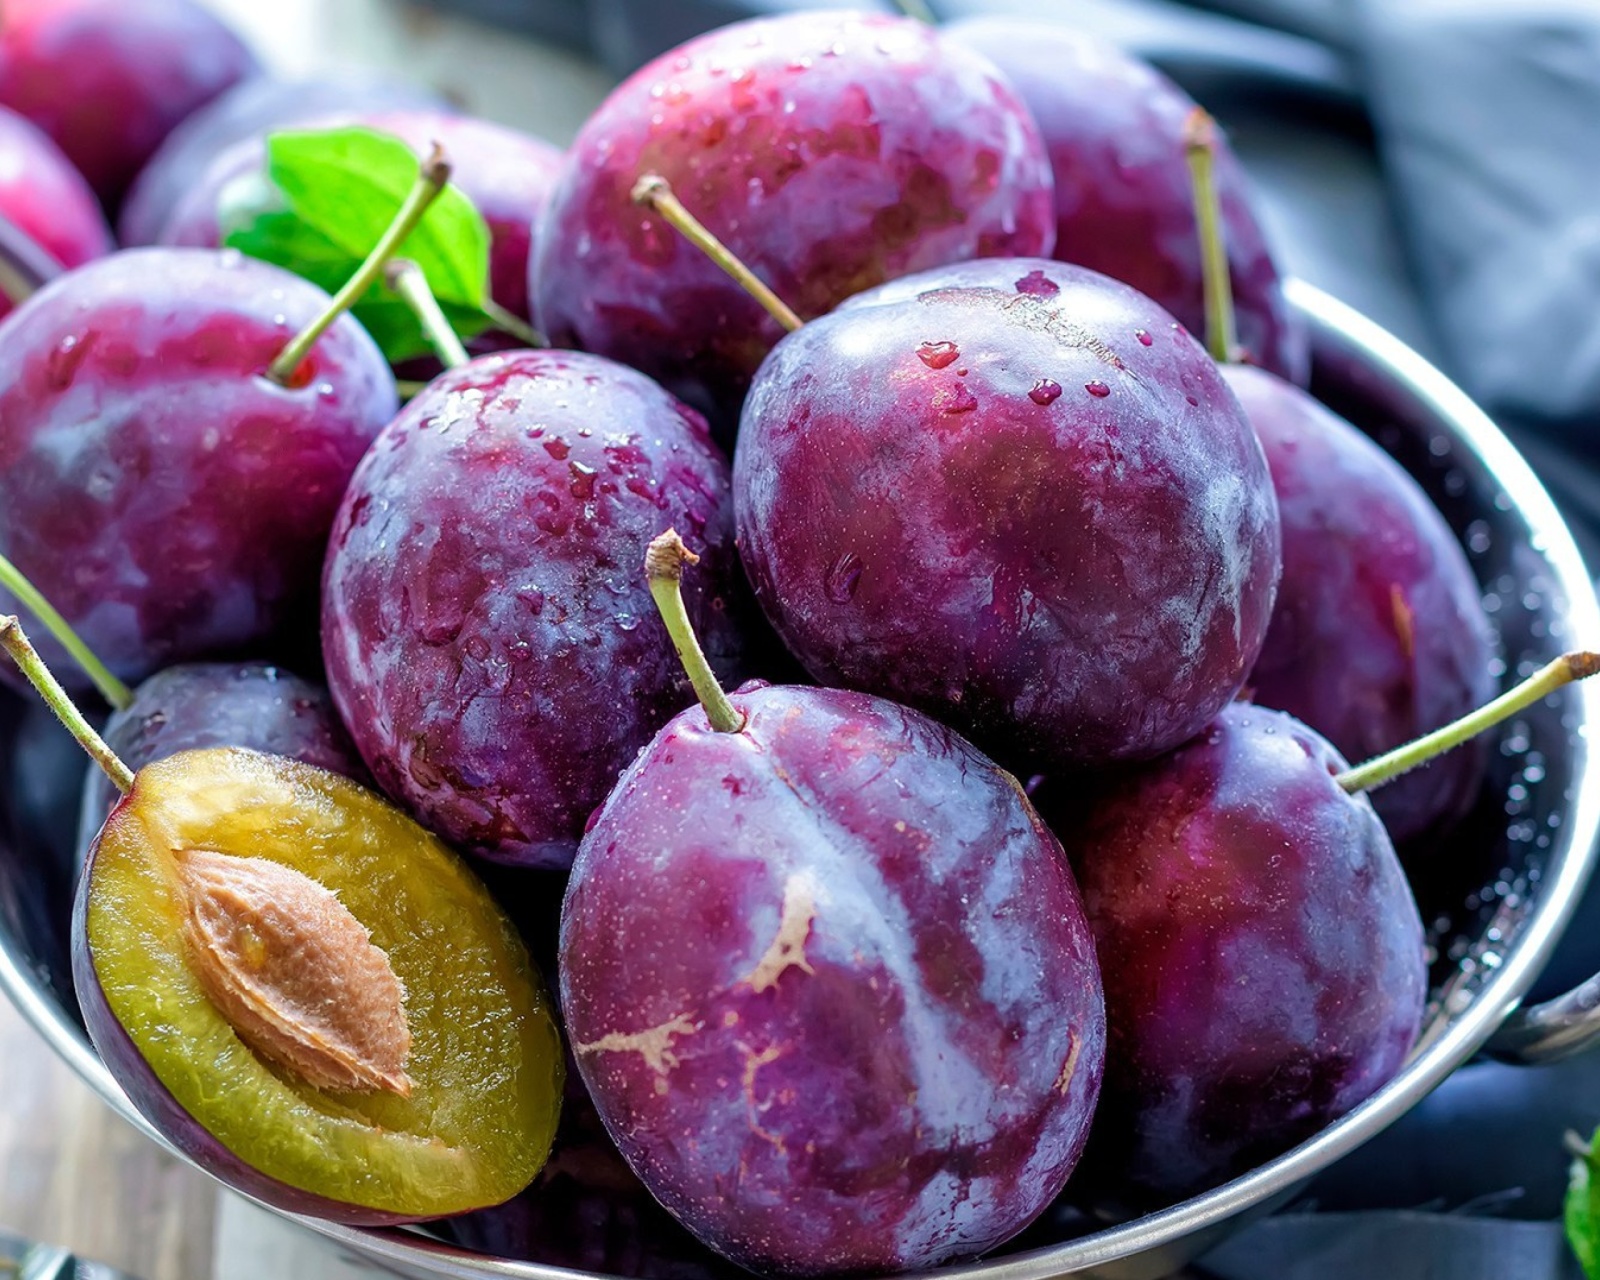 Plums with Vitamins wallpaper 1600x1280